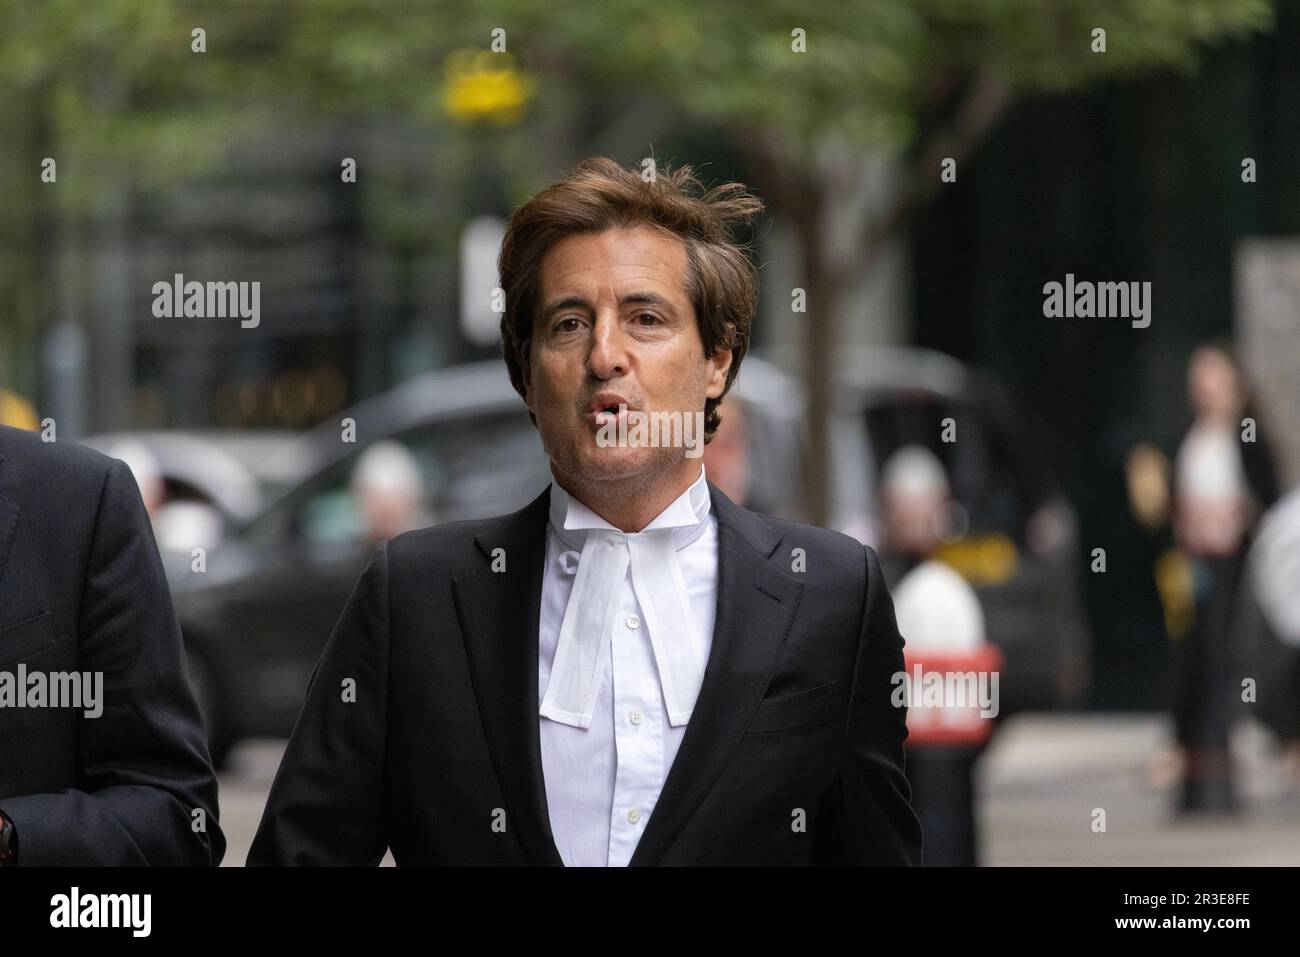 Davis Sherborne QC, high profile Barrister in the legal epicentre of the judicial system, at Royal Courts of Justice, Central London, England, UK Stock Photo